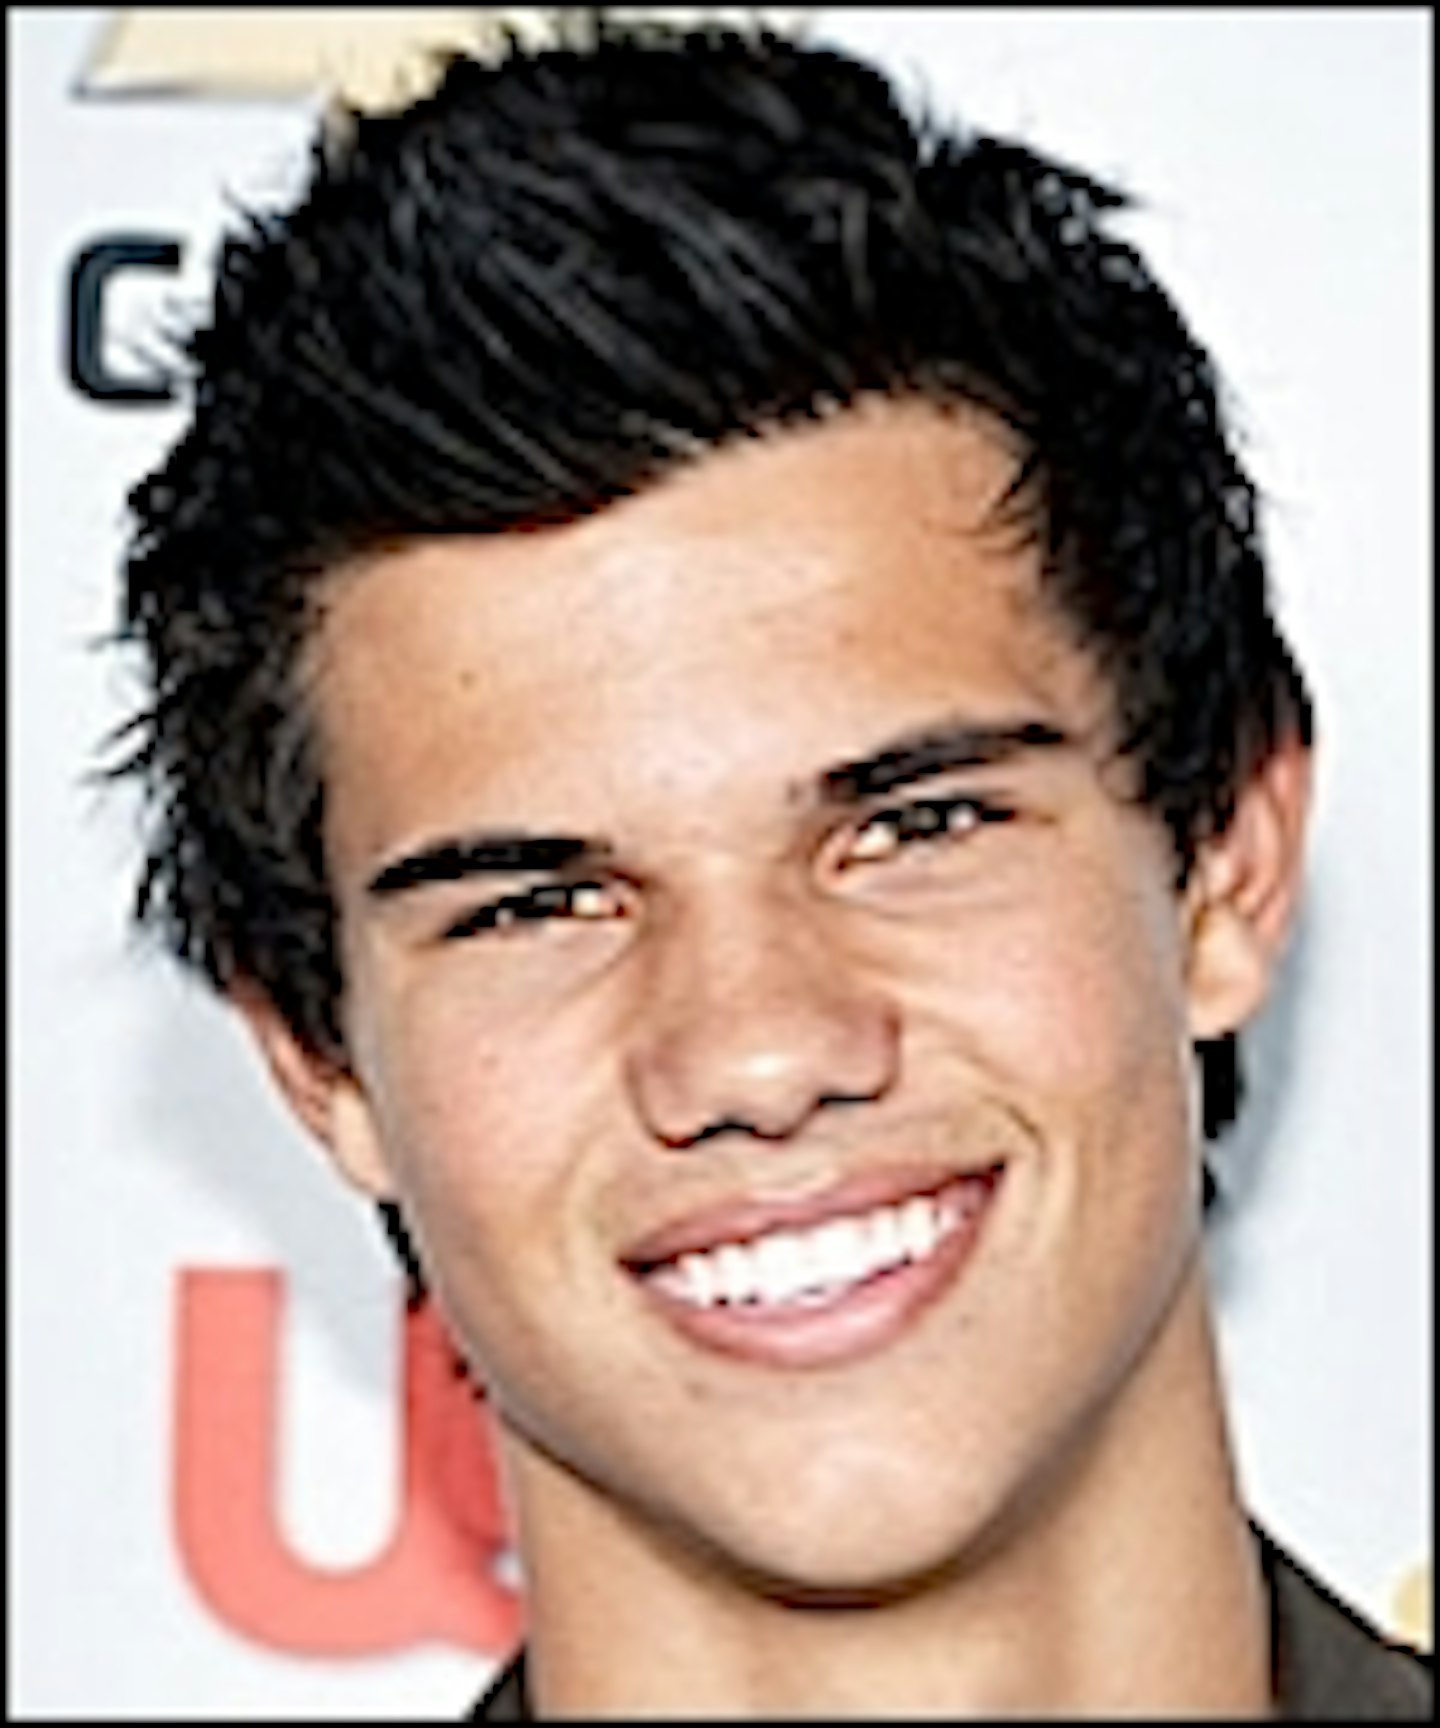 Taylor Lautner Going On A Vision Quest?